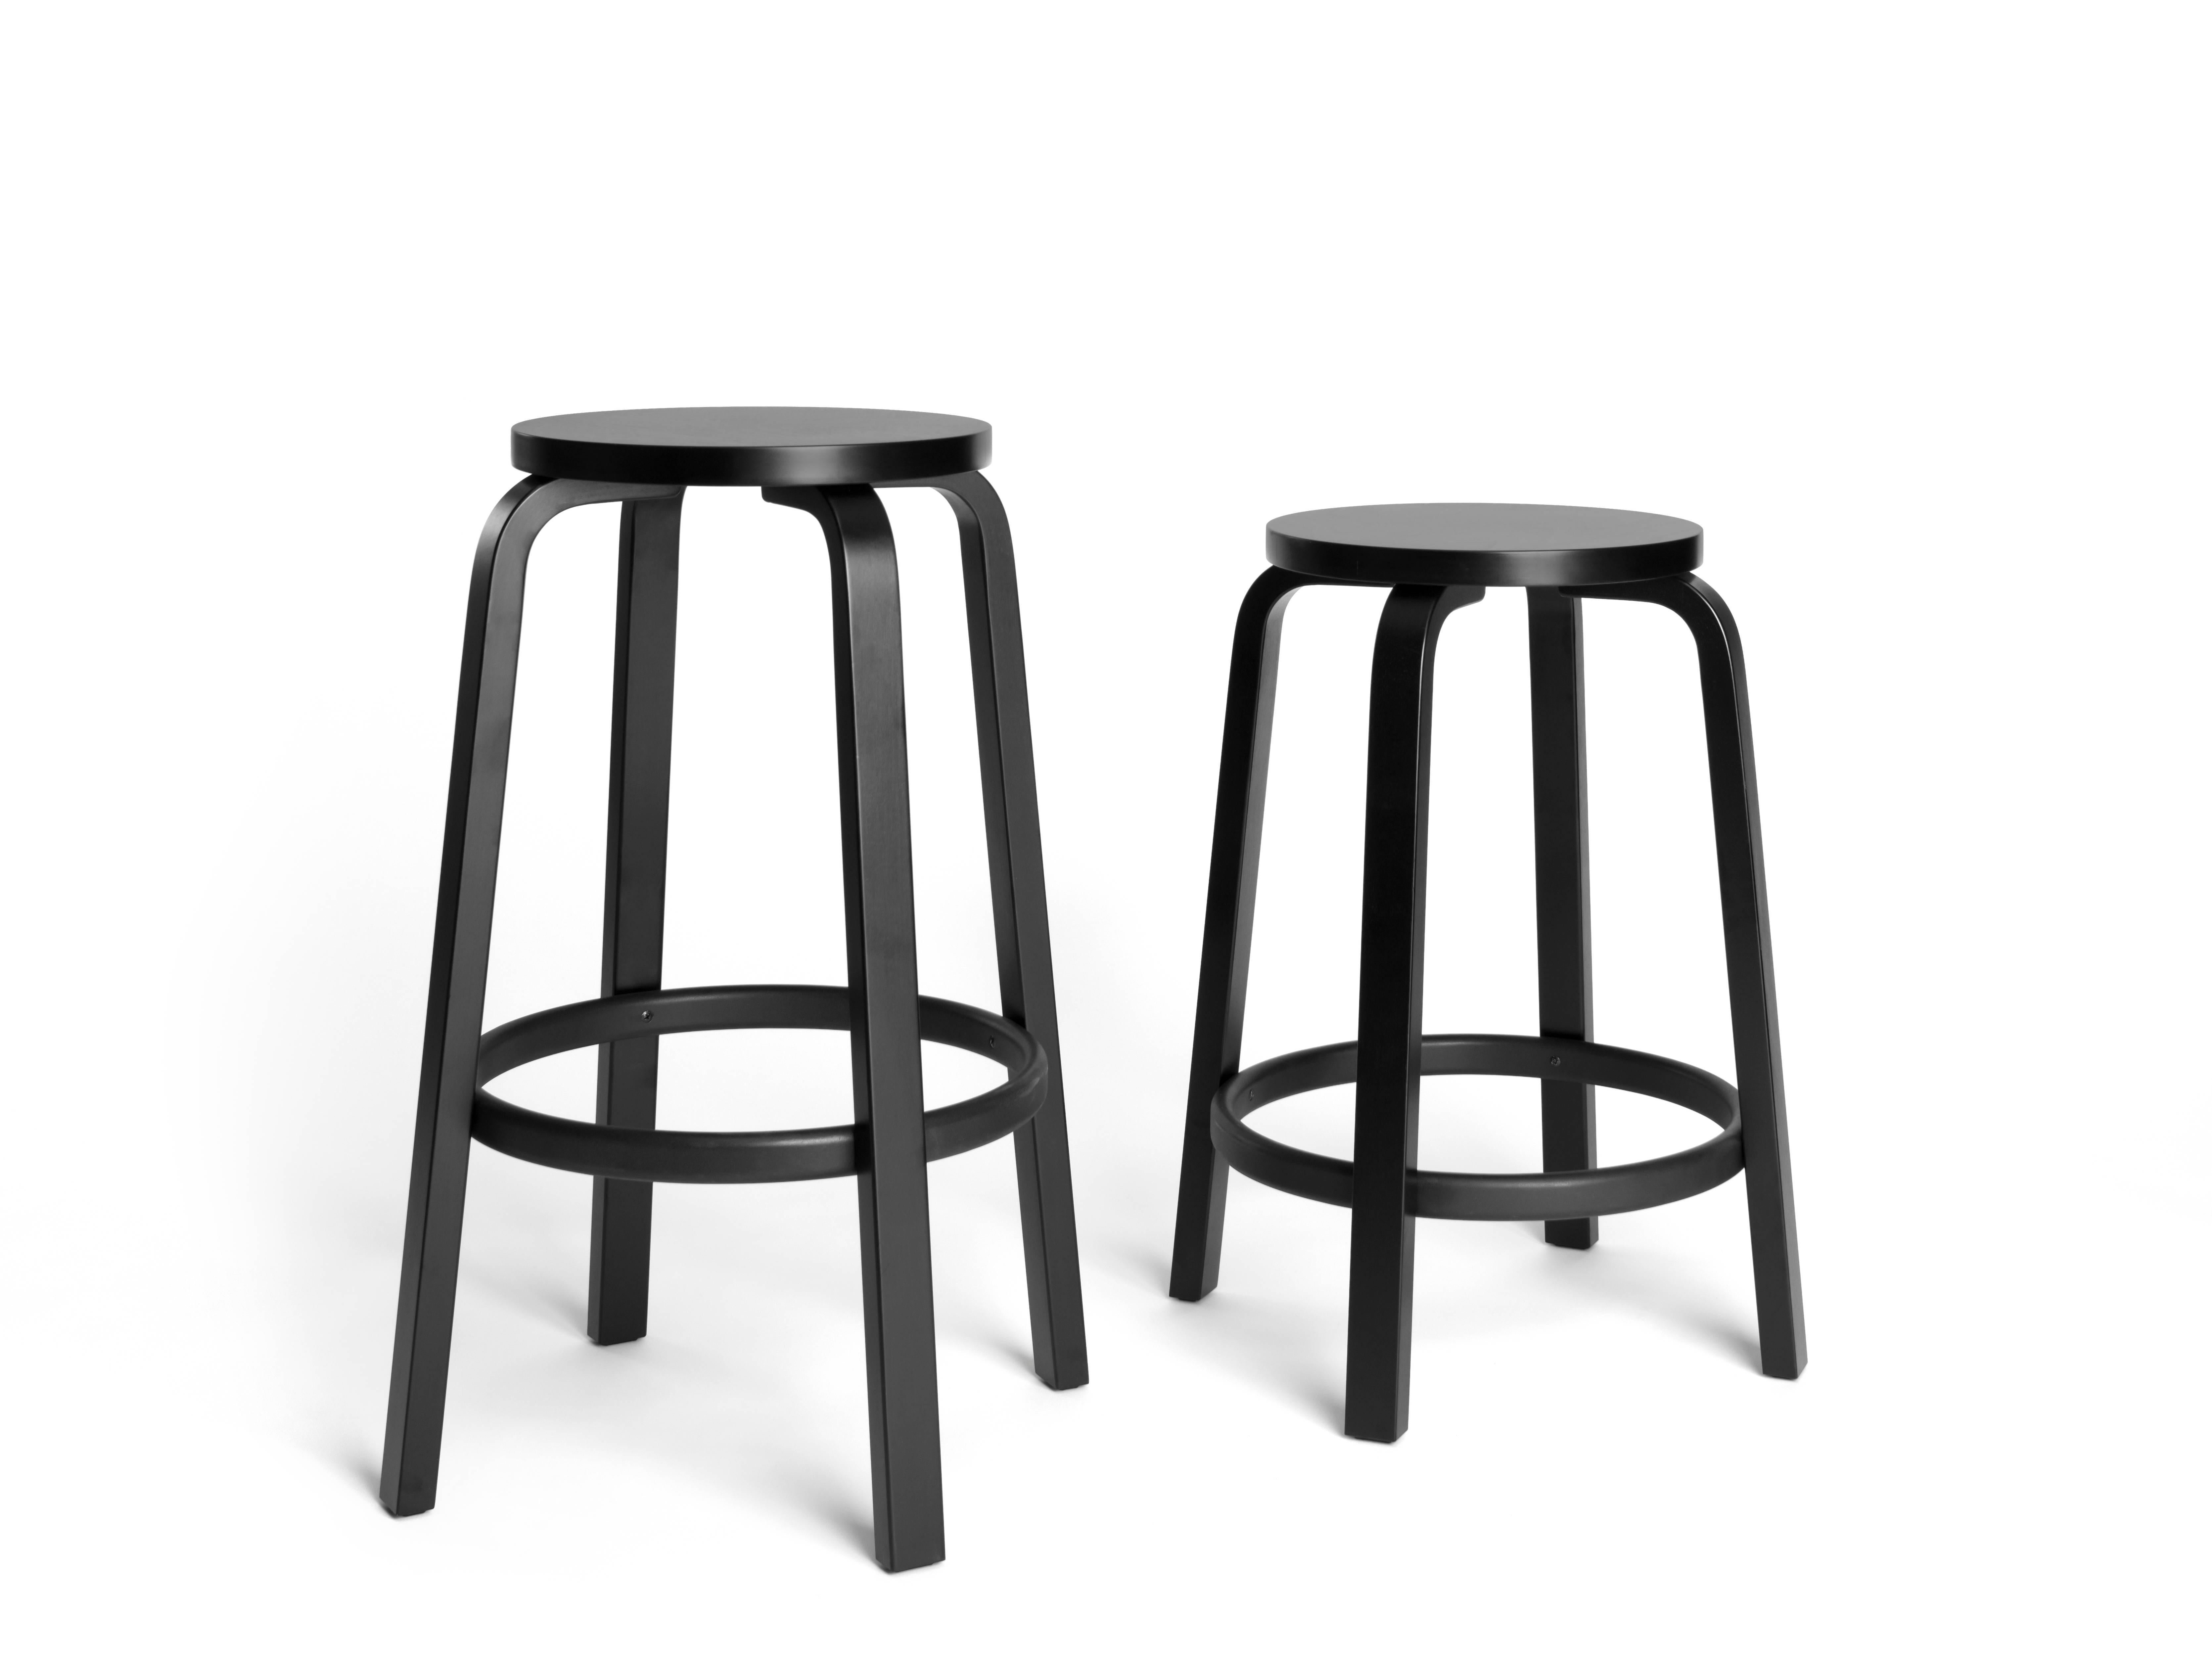 Taller in stature, this stool features a natural birch frame and can come accented by a laminate or linoleum seat surface. Perfect for high top tables and bar counters, the stool also features a sturdy birch rail footrest for added comfort without